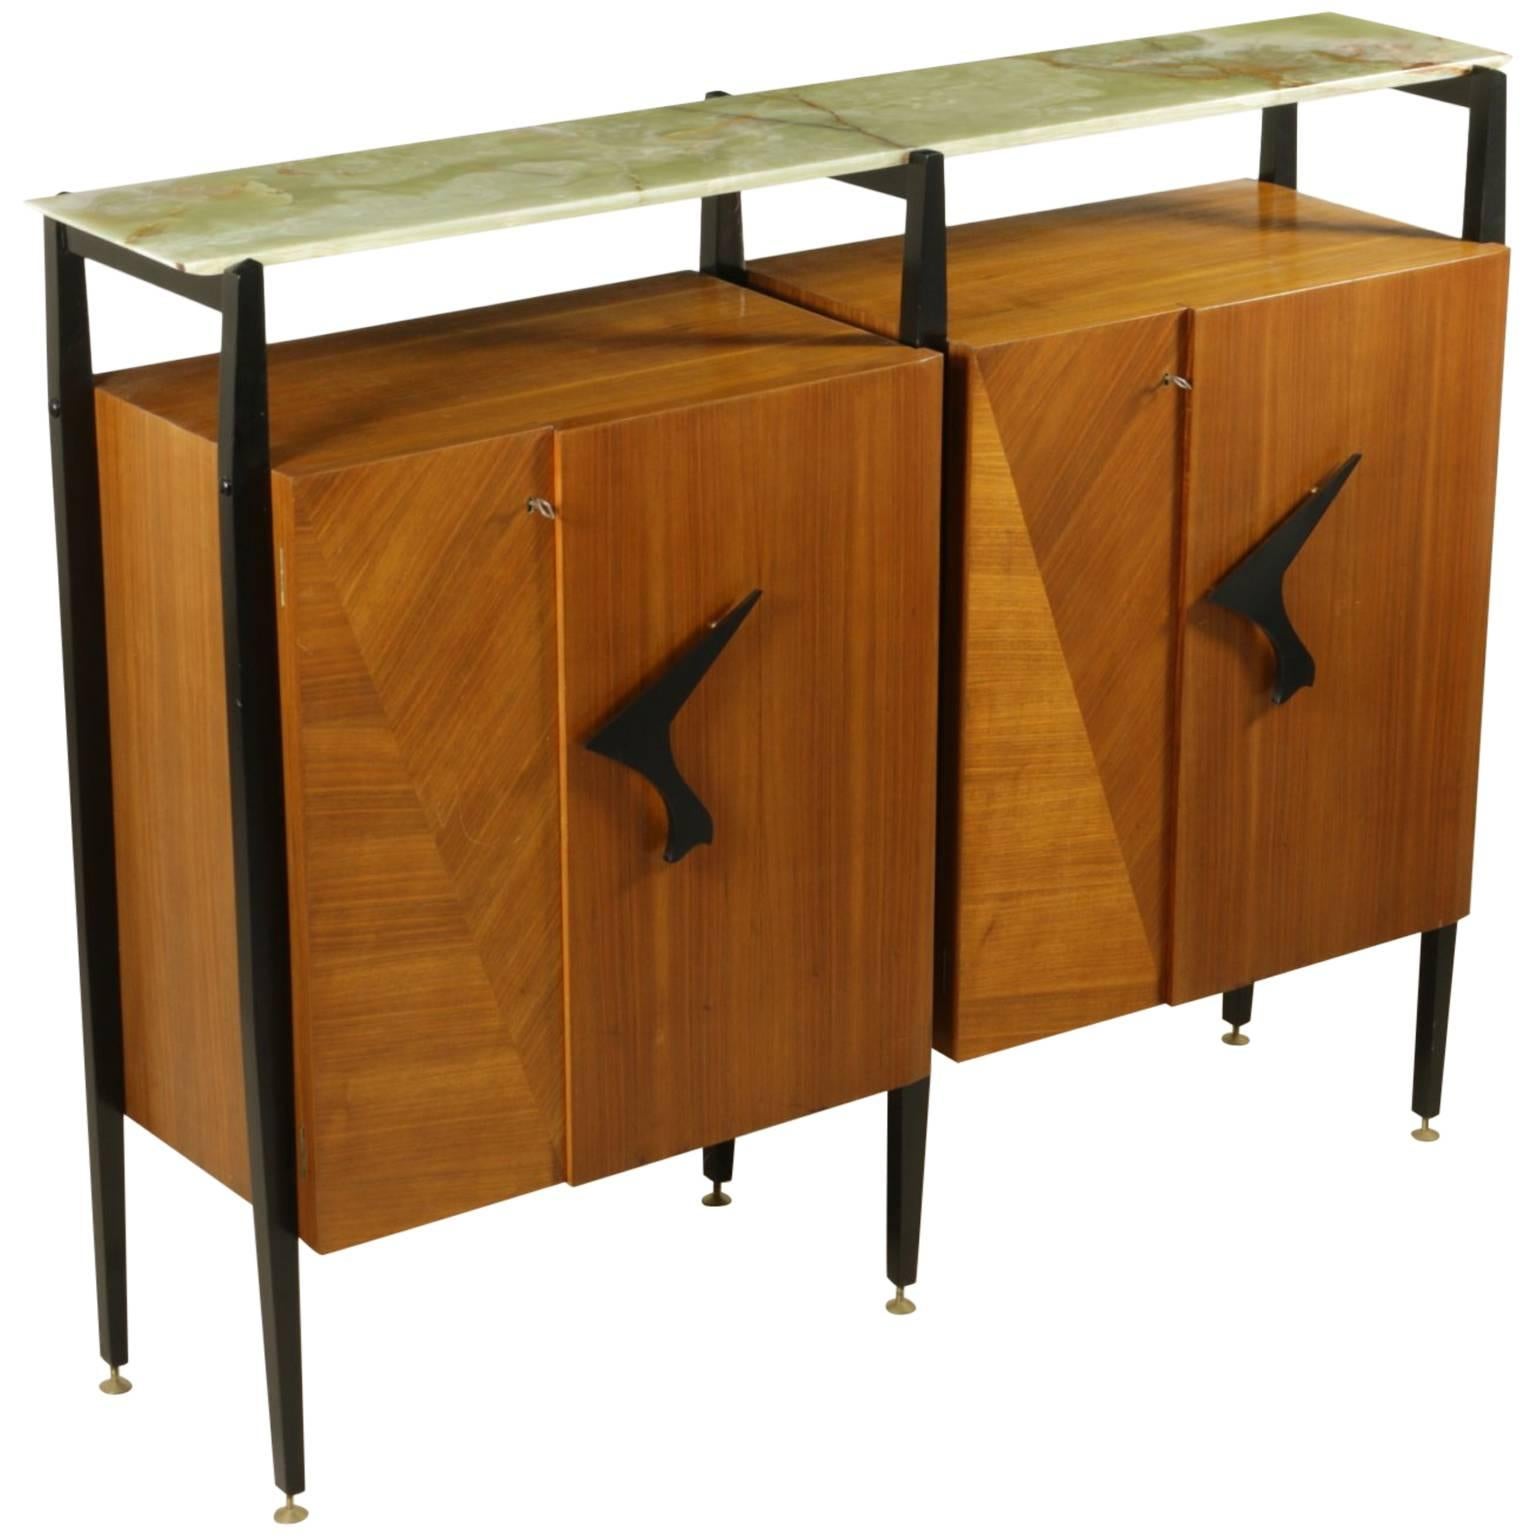 Living Room Cabinet Attributed to Luigi Scremin Maple and Mahogany Veneer, 1950s